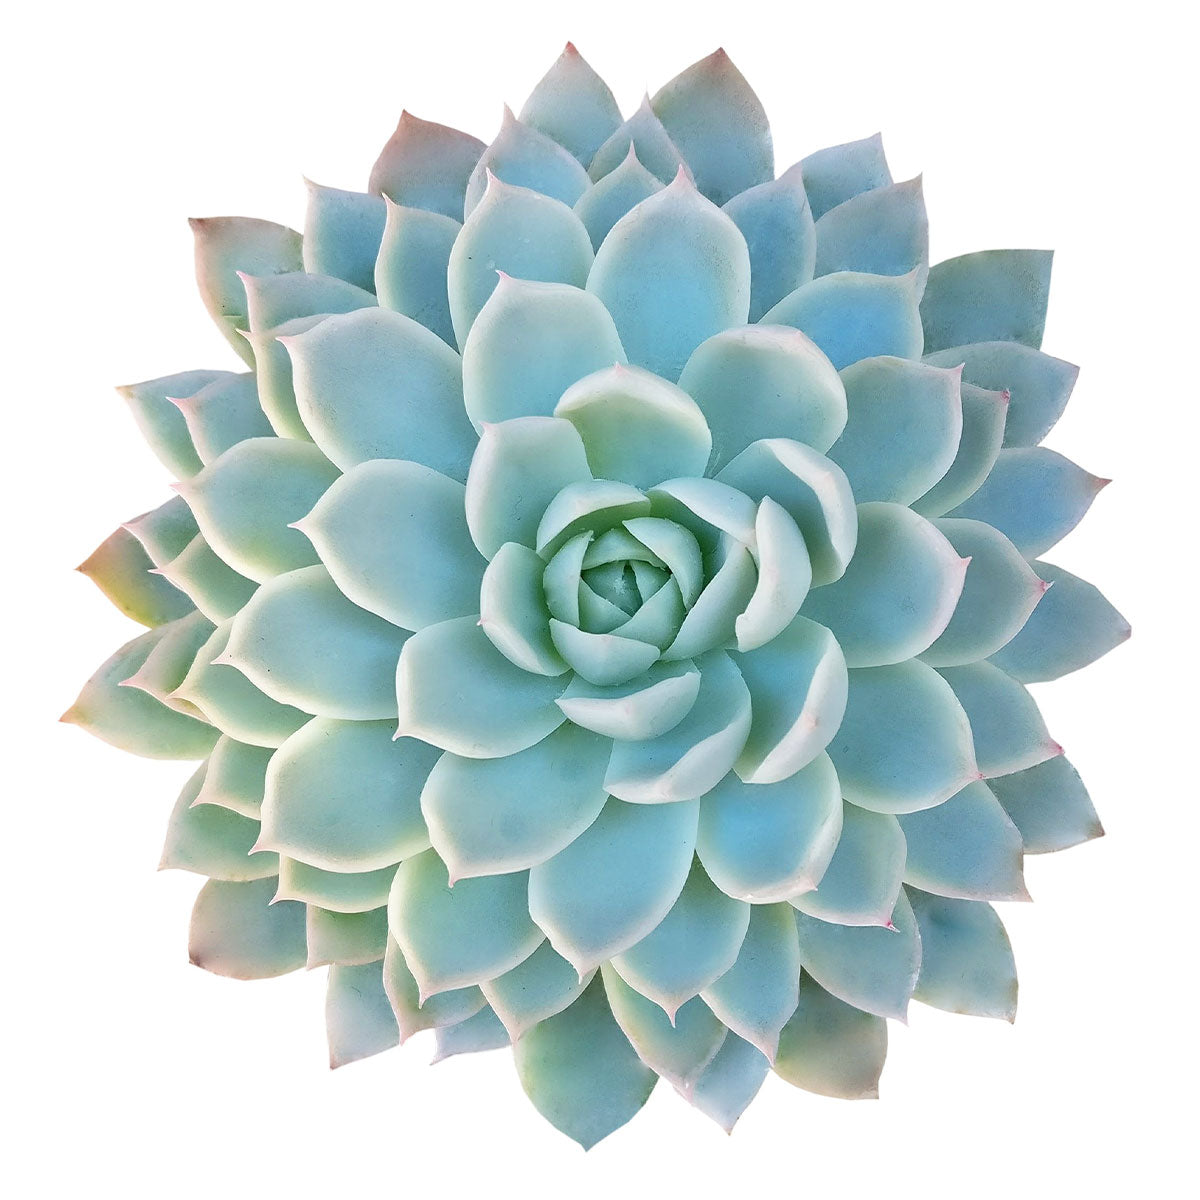 Succulents for Beginners